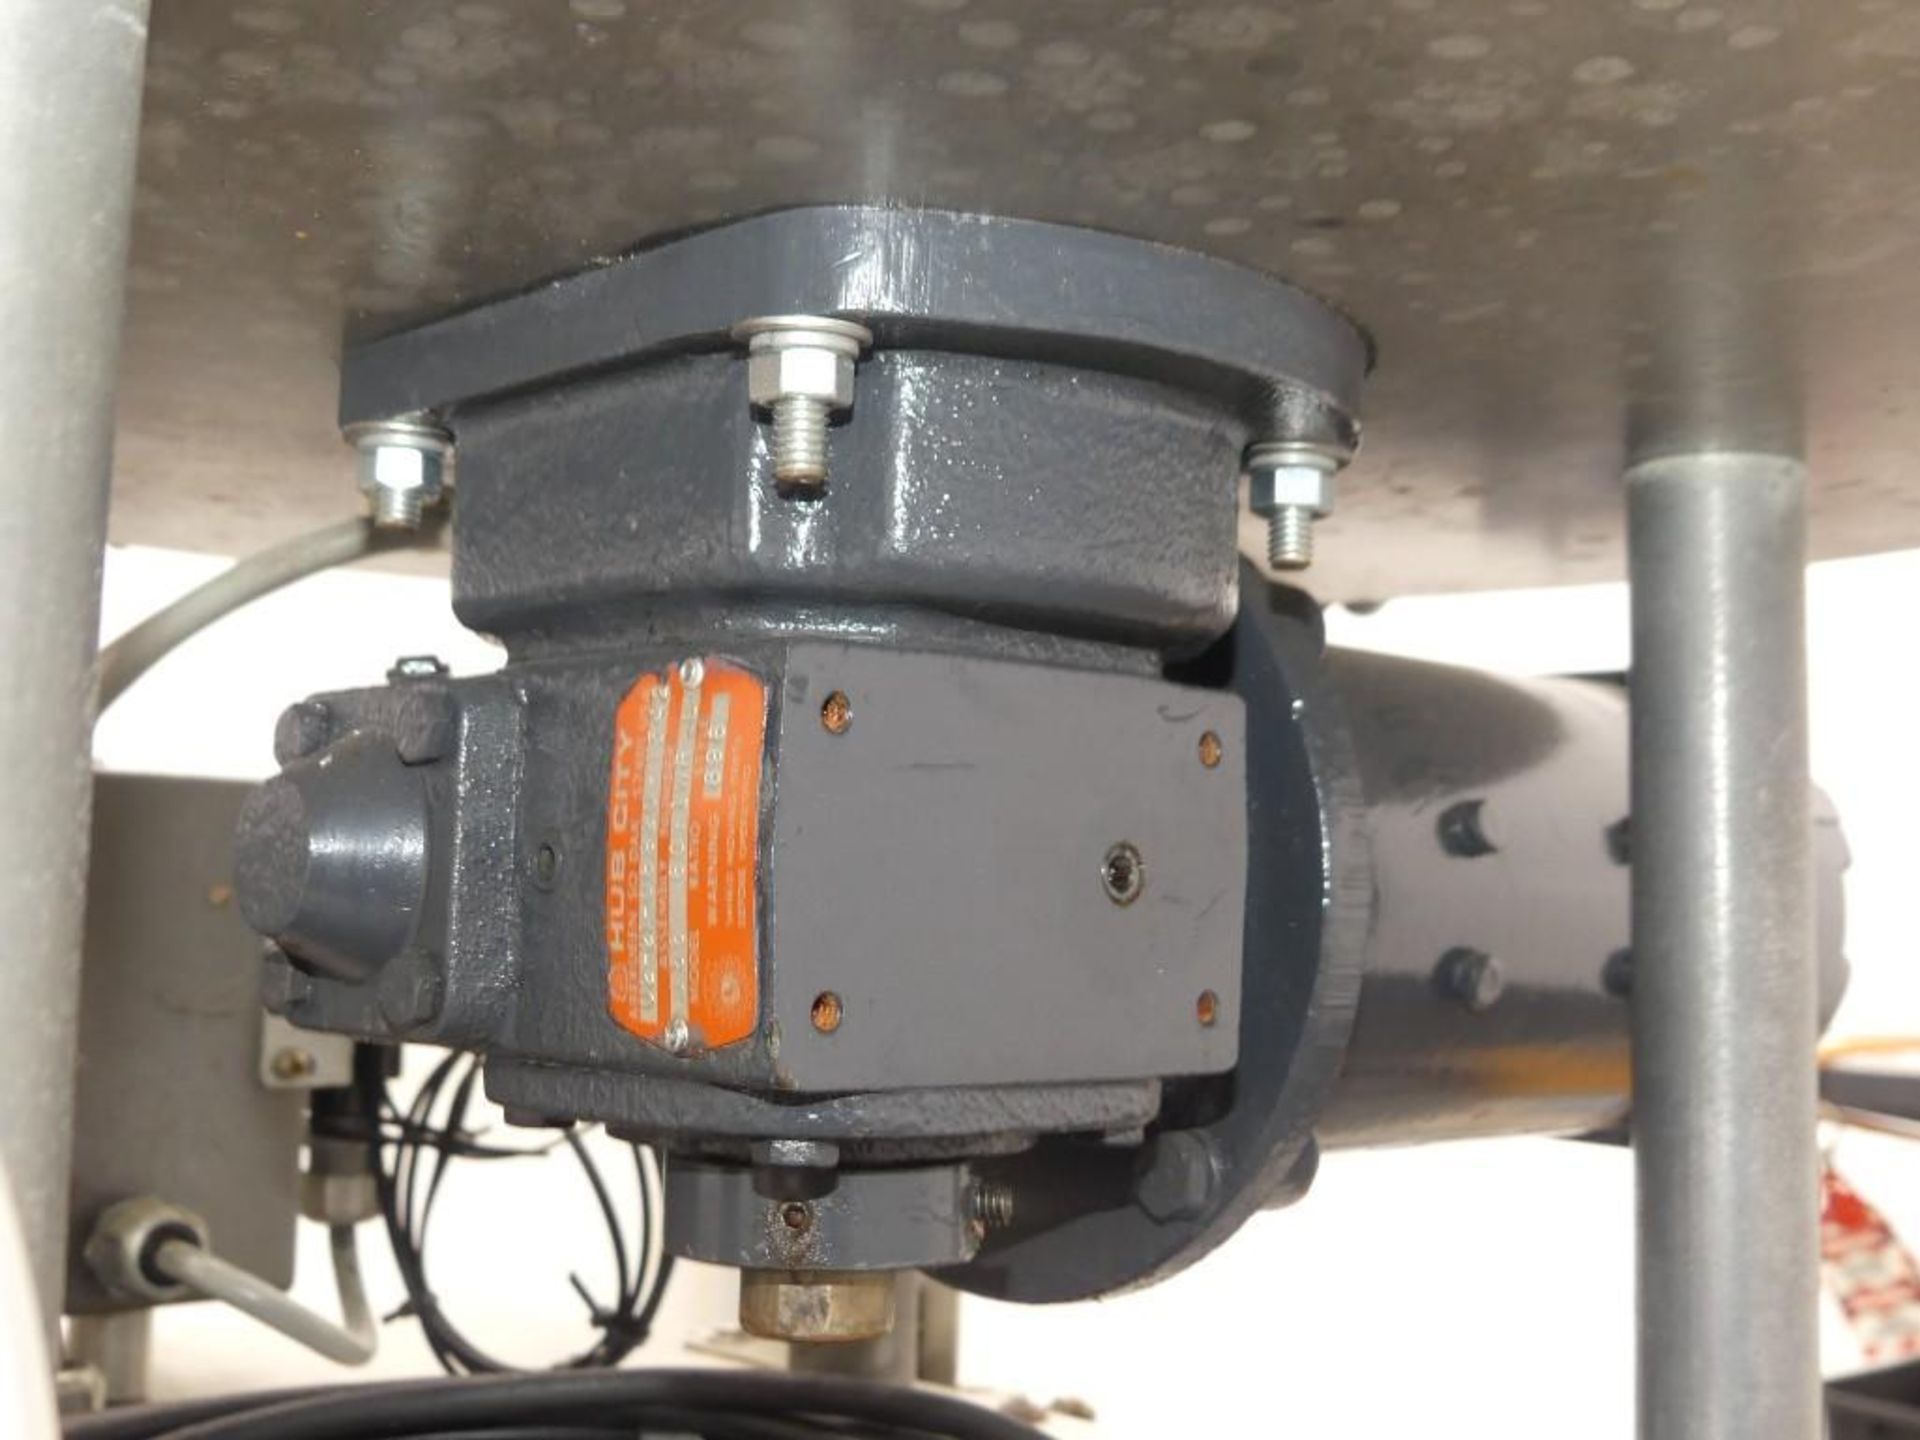 Kaps-All Model E4 Spindle Capper with a Feed Systems FSRF-24 Cap Feeder - Image 11 of 35